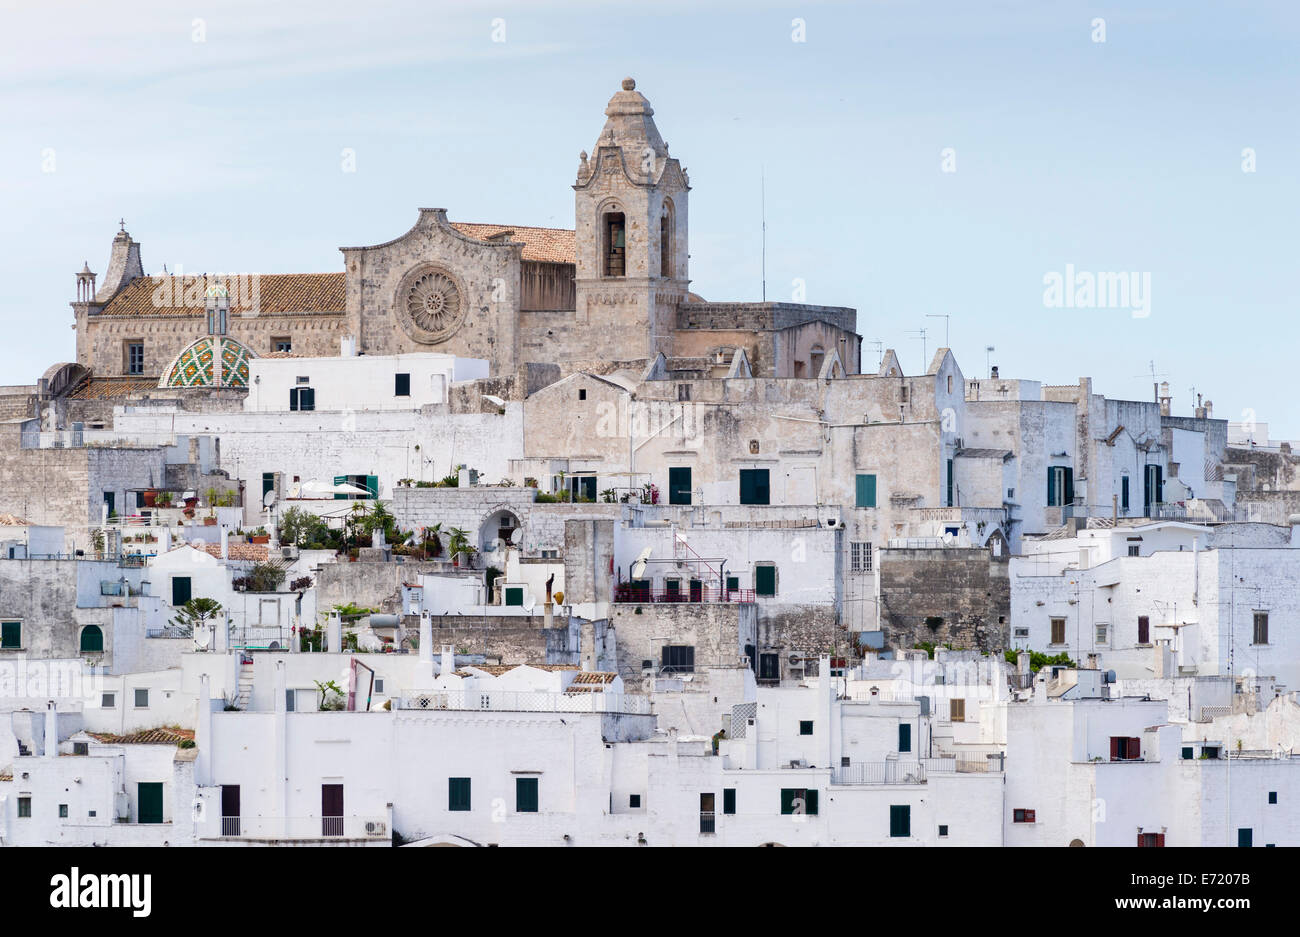 View of the town with the cathedral, Ostuni, Apulia, Italy Stock Photo